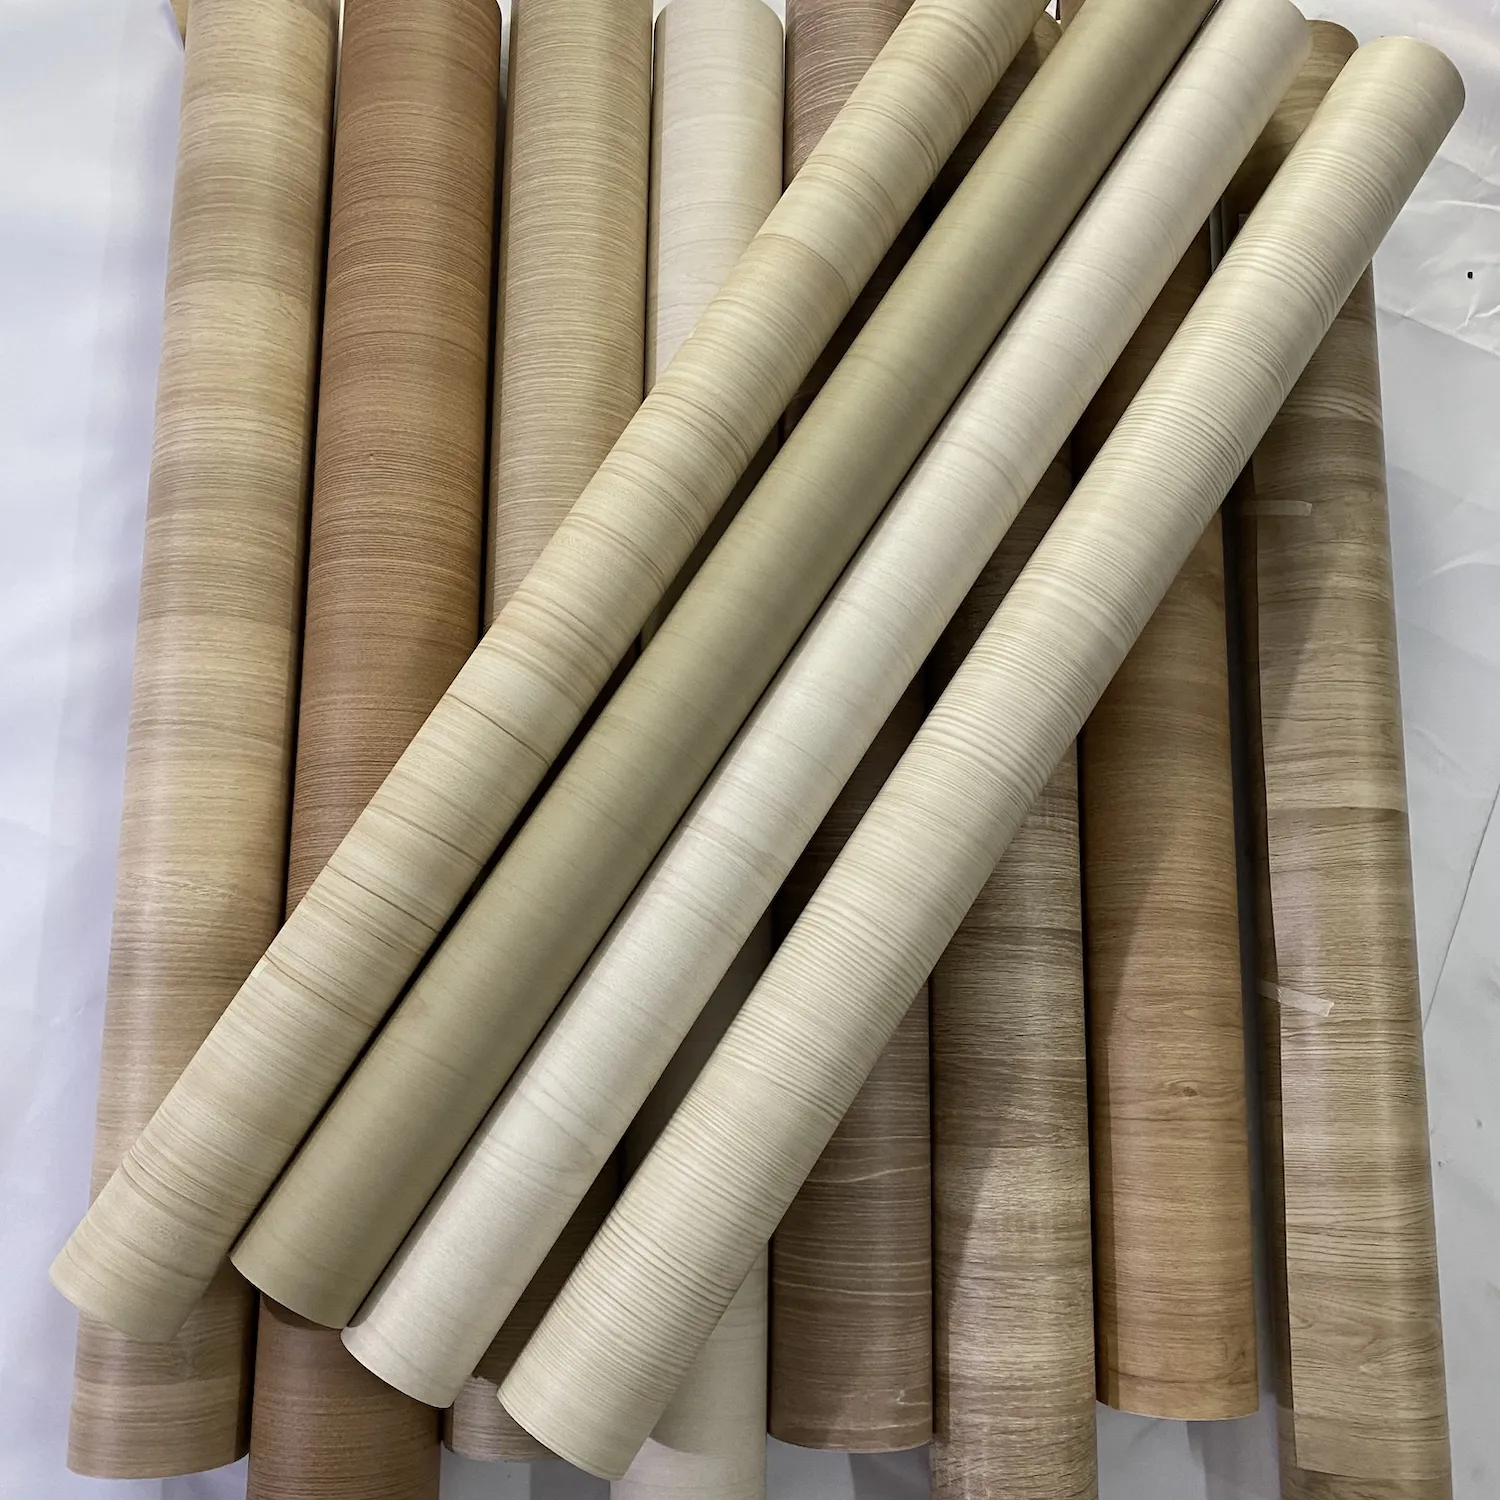 PVC Wood Contact Paper Adhesive Wood Peel and Stick Wallpaper Decorative Wood Wall Covering Interior Film